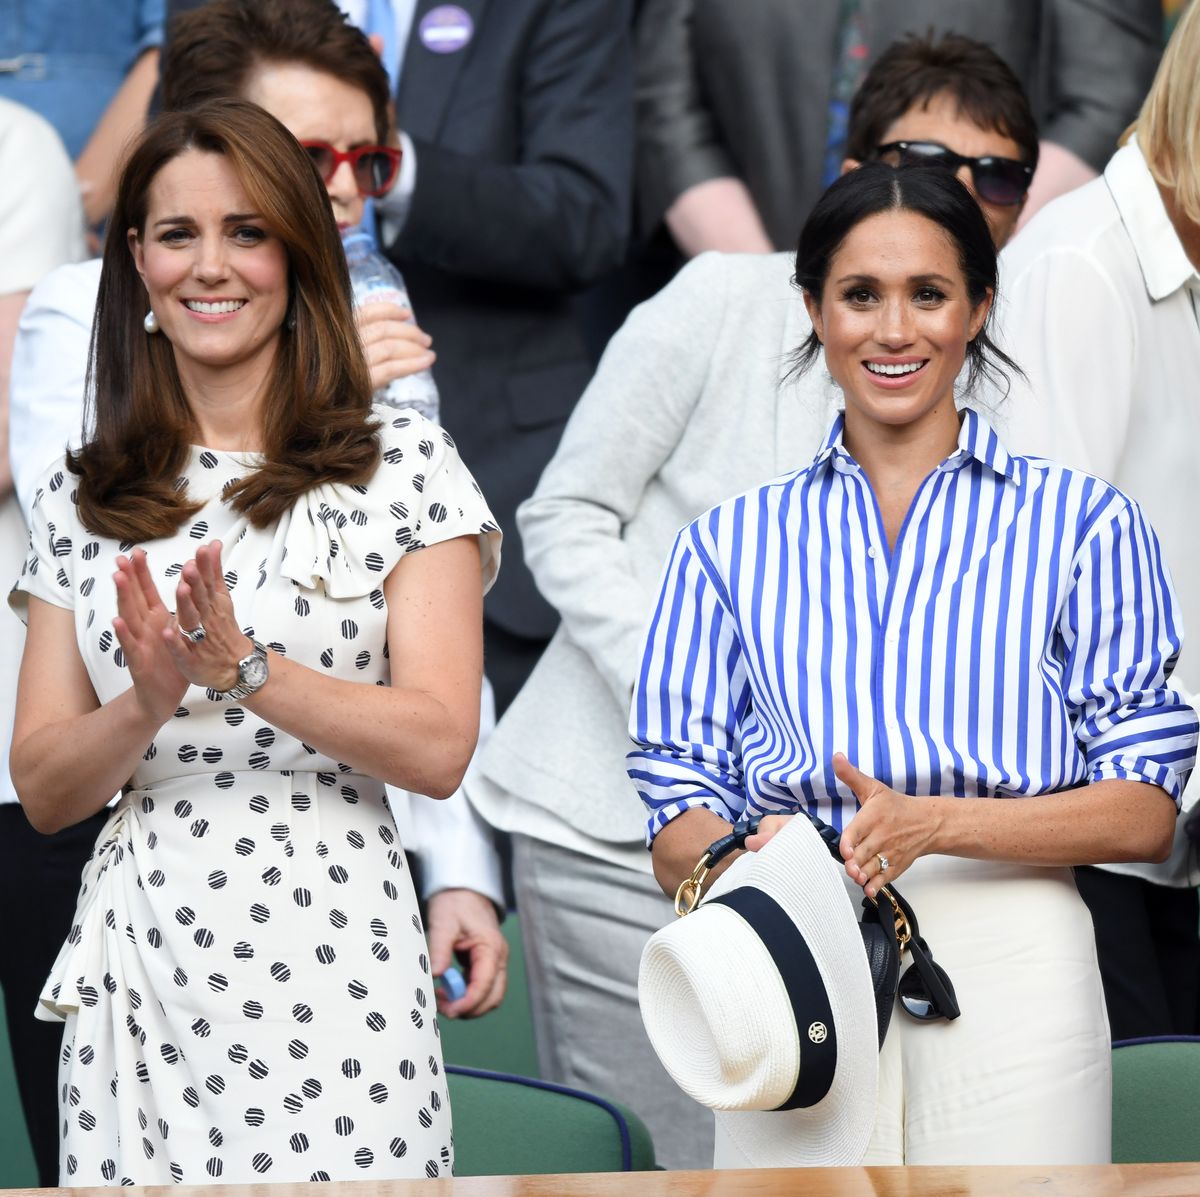 london, england july 14 catherine, duchess of cambridge and meghan, duchess of sussex attend day twelve of the wimbledon tennis championships at the all england lawn tennis and croquet club on july 14, 2018 in london, england photo by karwai tangwireimage